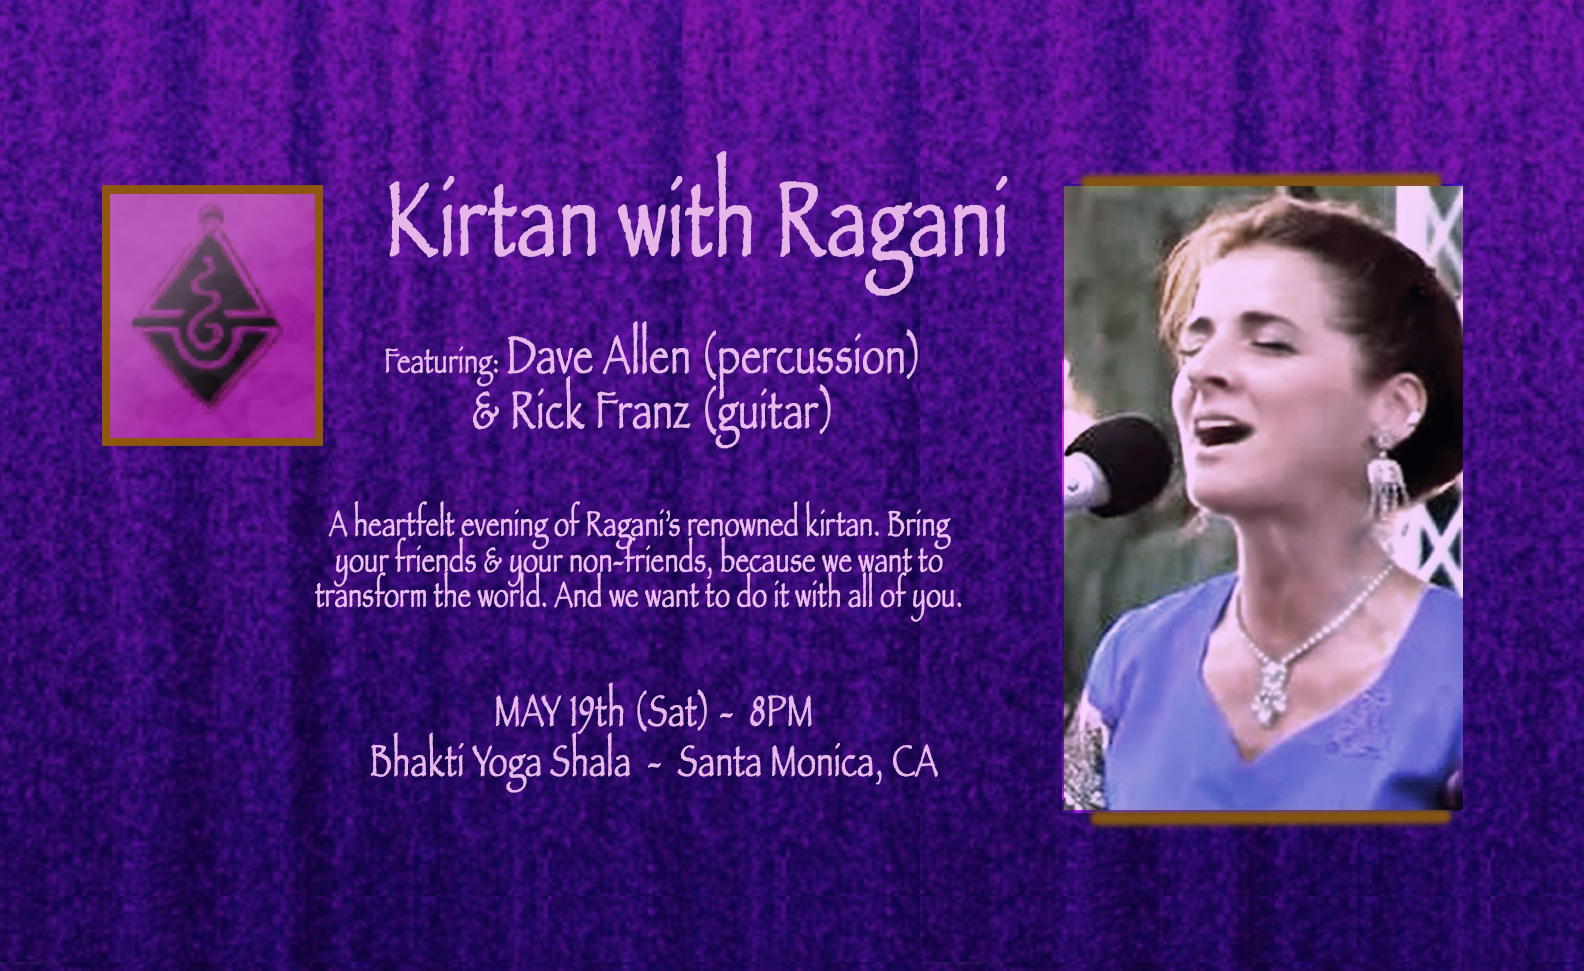 Special Evening of Kirtan (Yoga Chant) with Ragani